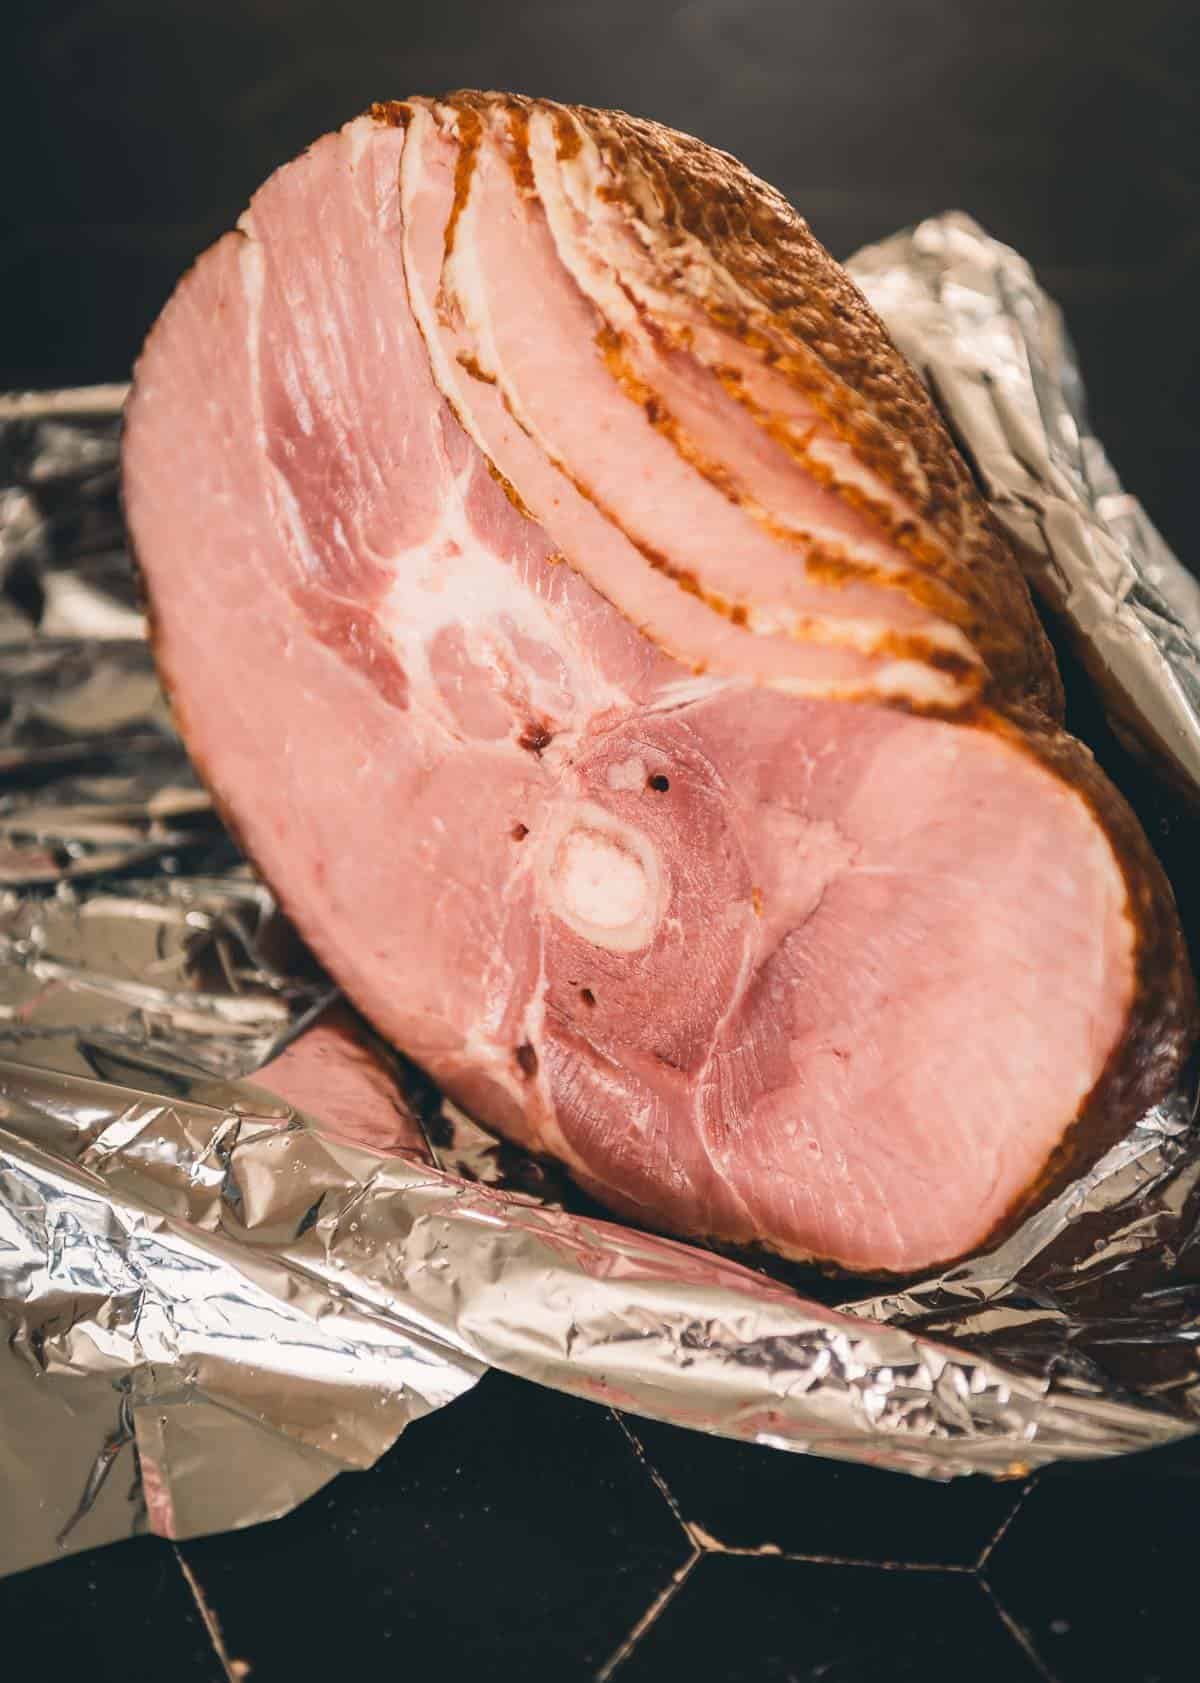 A spiral ham is sitting on a piece of foil.